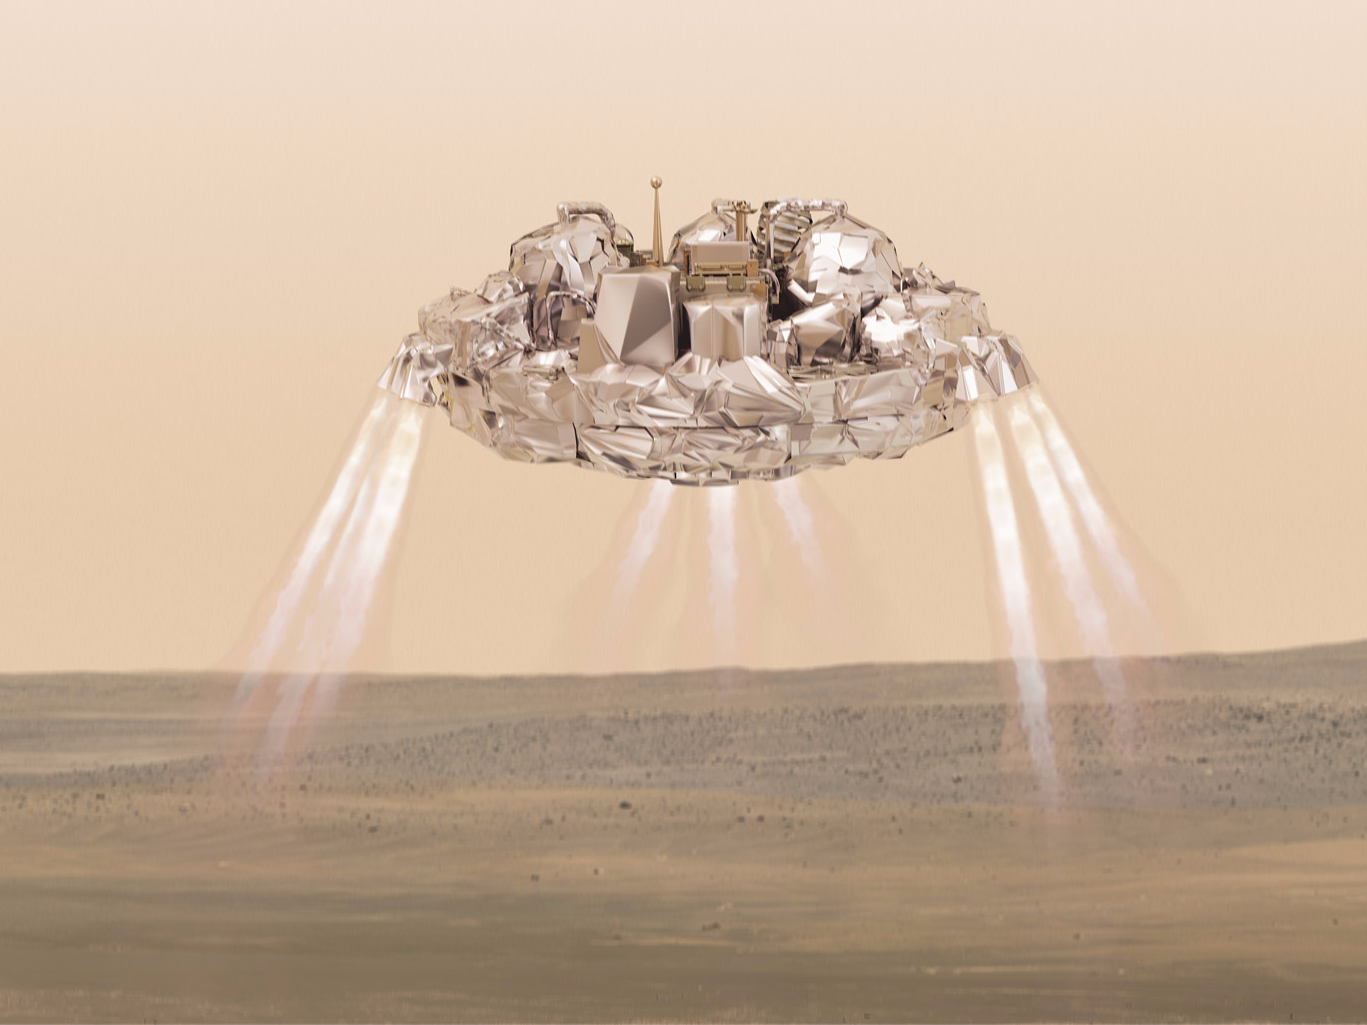 Europe's lost Mars lander probably 'exploded on impact' — see the photos - Business Insider